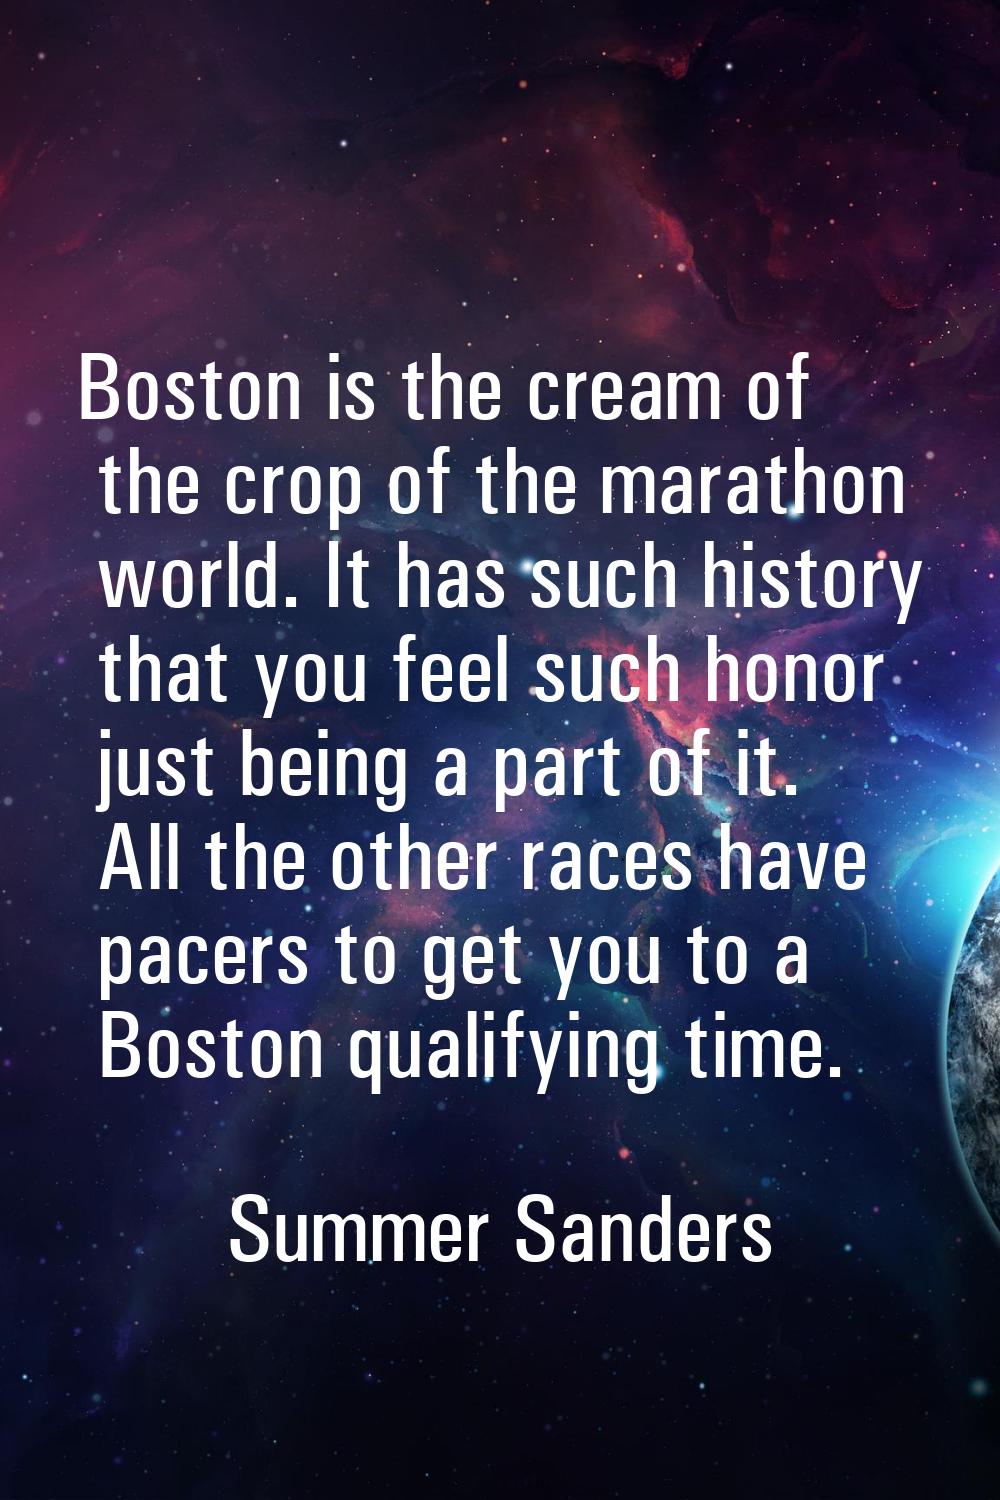 Boston is the cream of the crop of the marathon world. It has such history that you feel such honor